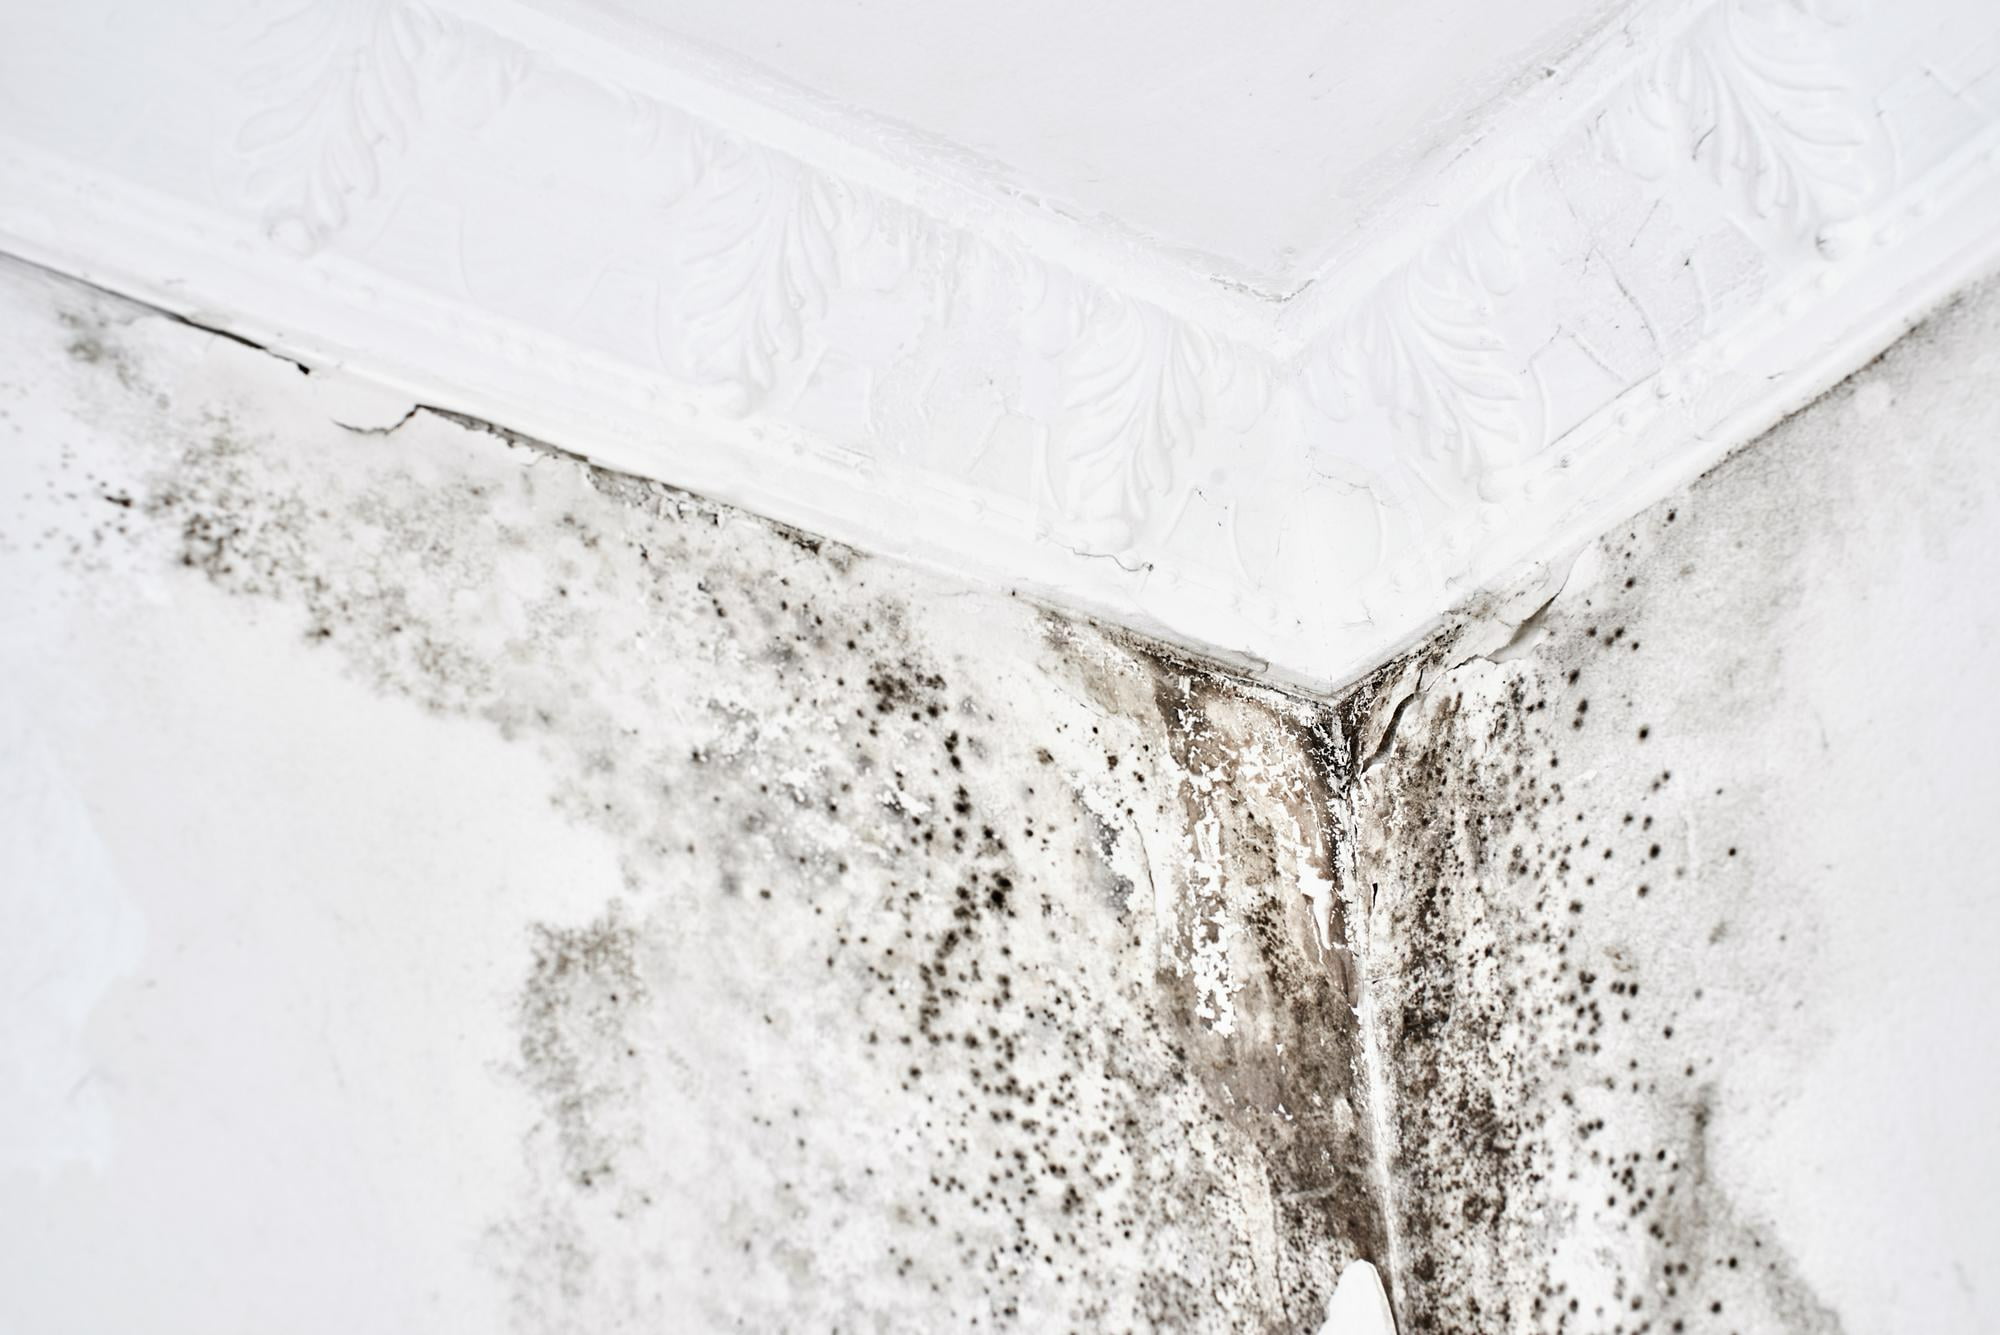 mold exposure shown in corner of wall and ceiling in home